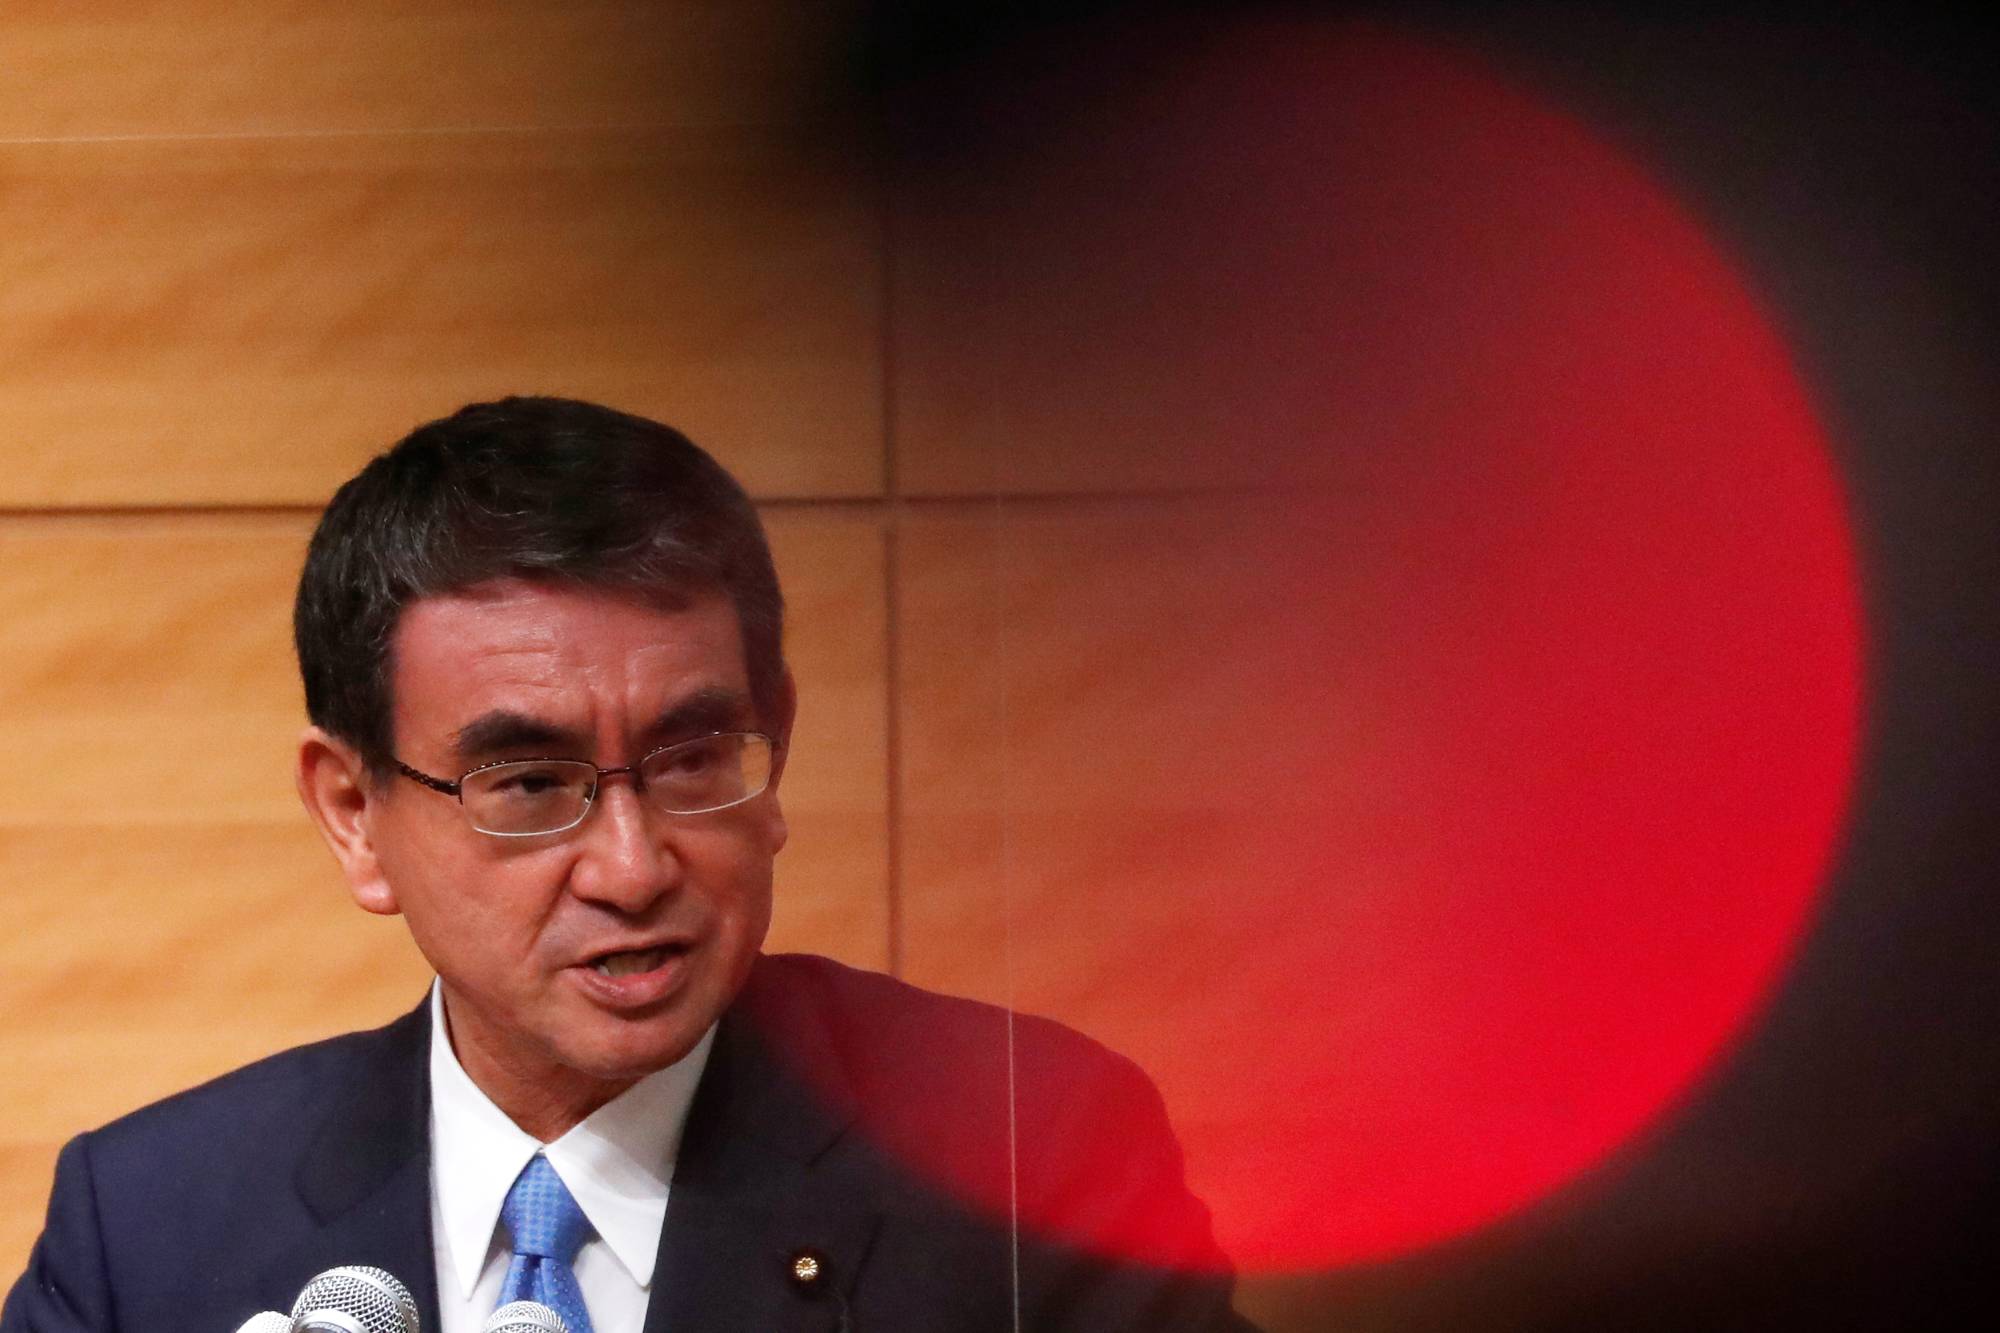 Lawmaker Taro Kono was in the news a lot this year. At one point he acted as the government’s vaccine czar, and later ran for Liberal Democratic Party president and thus for the prime minister’s job. | REUTERS